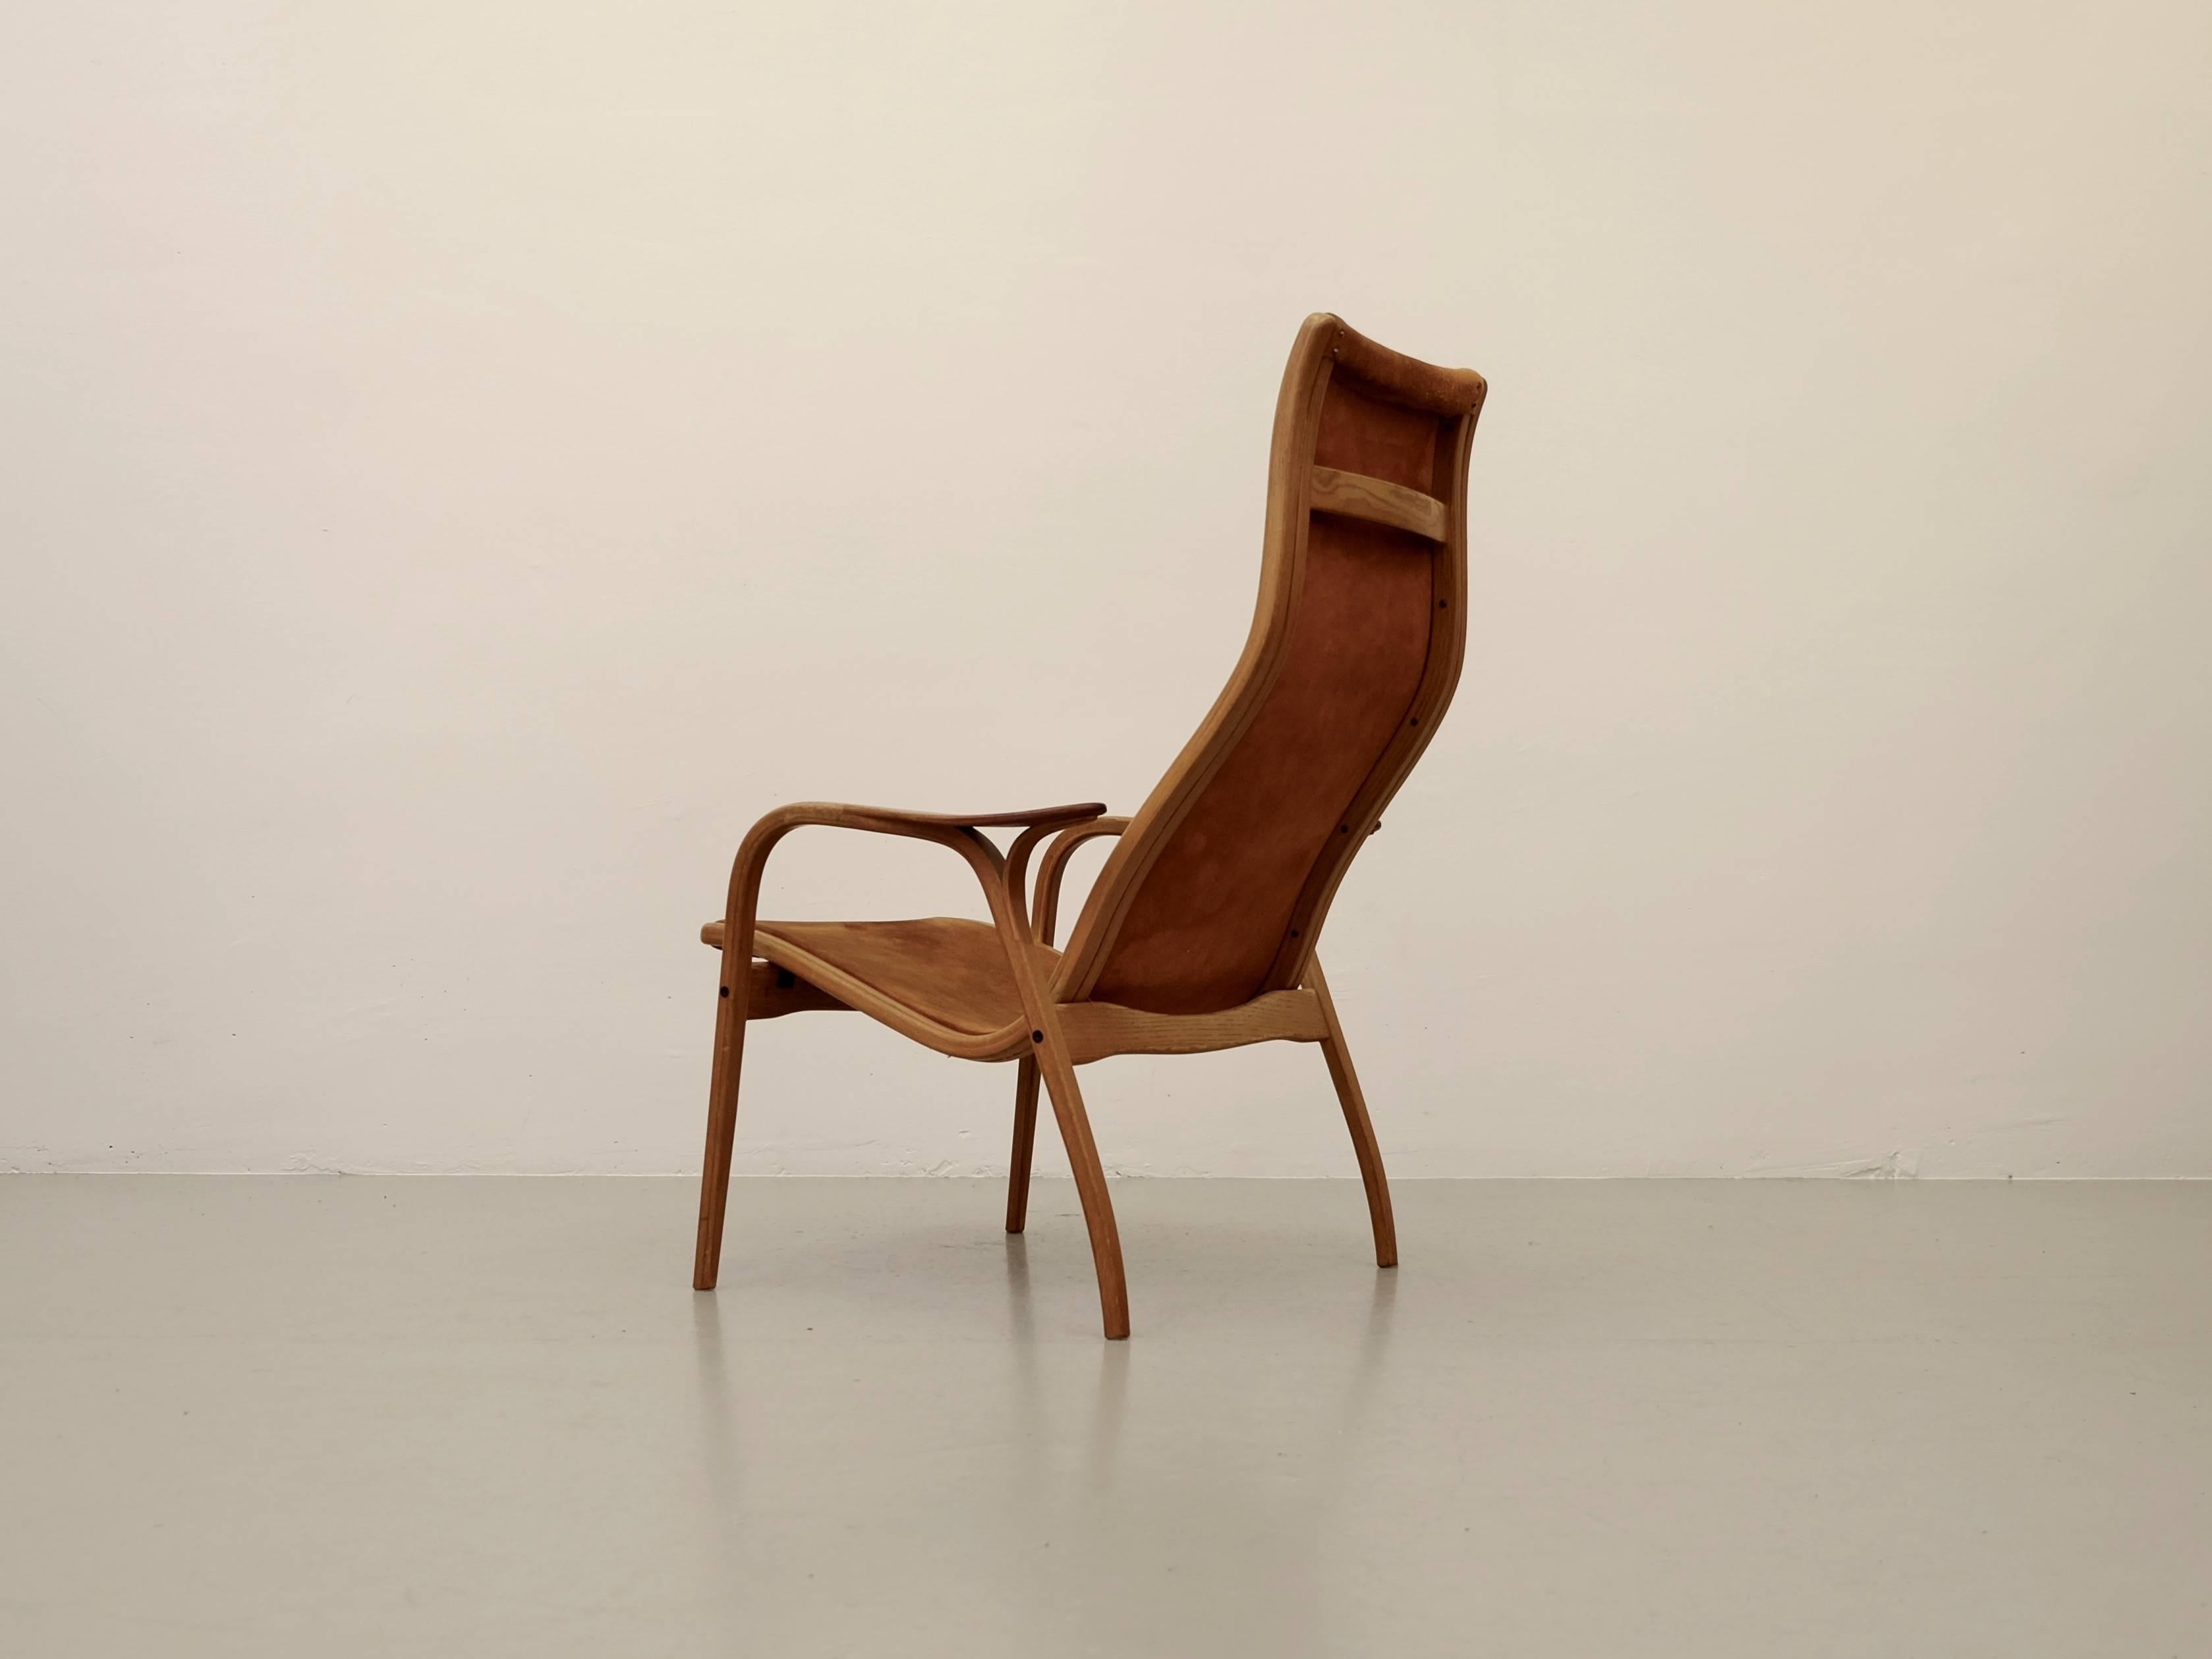 Scandinavian Modern Lamino chair by Yngve Ekström for Swedese. This piece is from 1964. This chair features bentwood teak construction with suede upholstery.